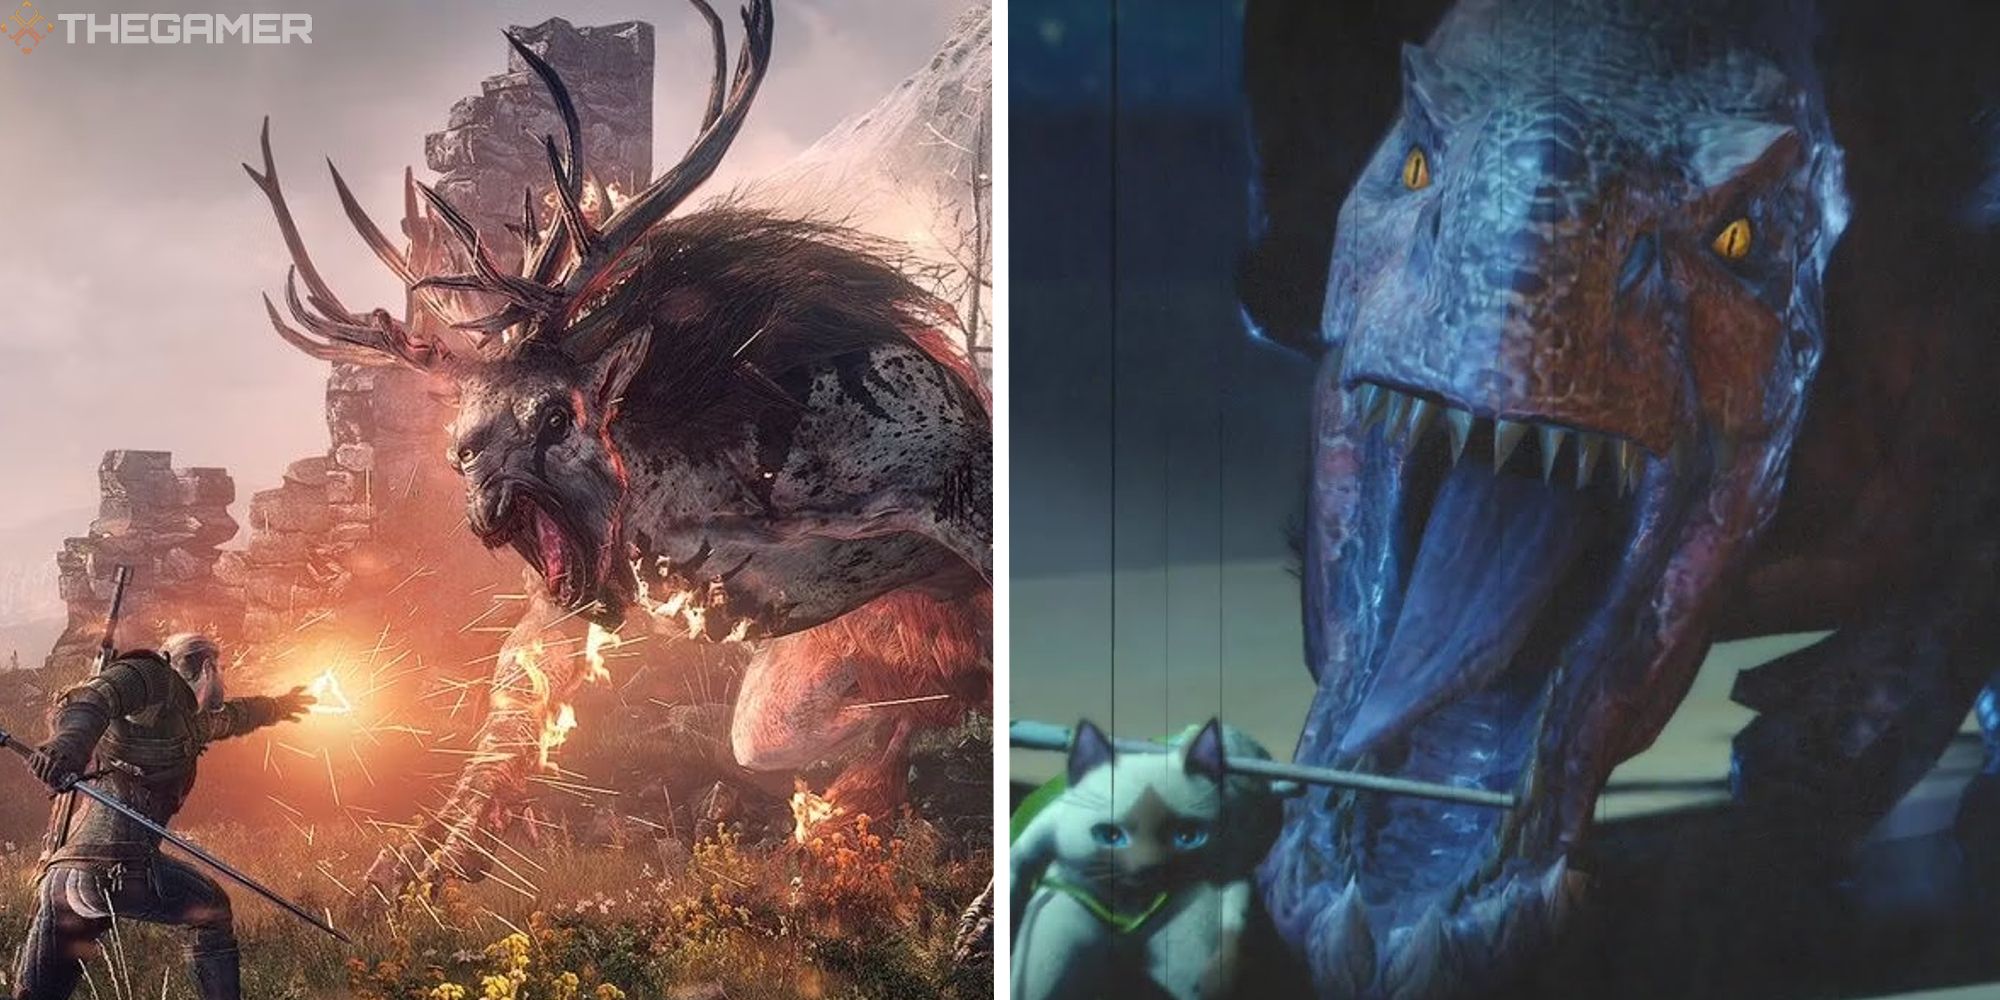 image from the witcher next to image from monster hunter